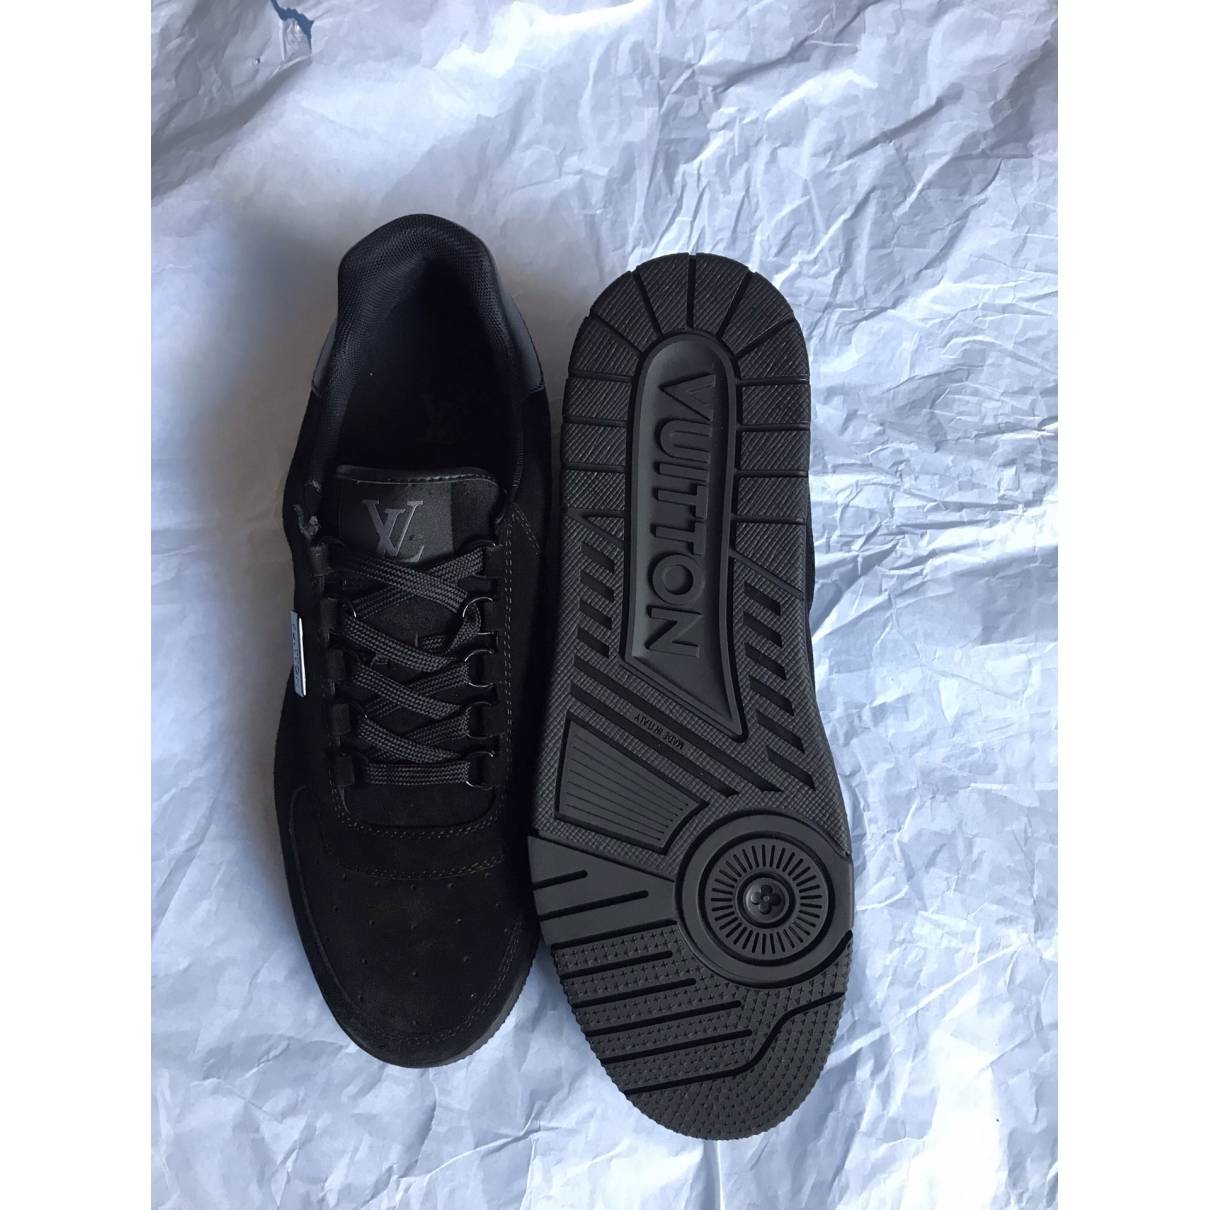 Lv trainer low trainers Louis Vuitton Black size 9 UK in Suede - 31876114